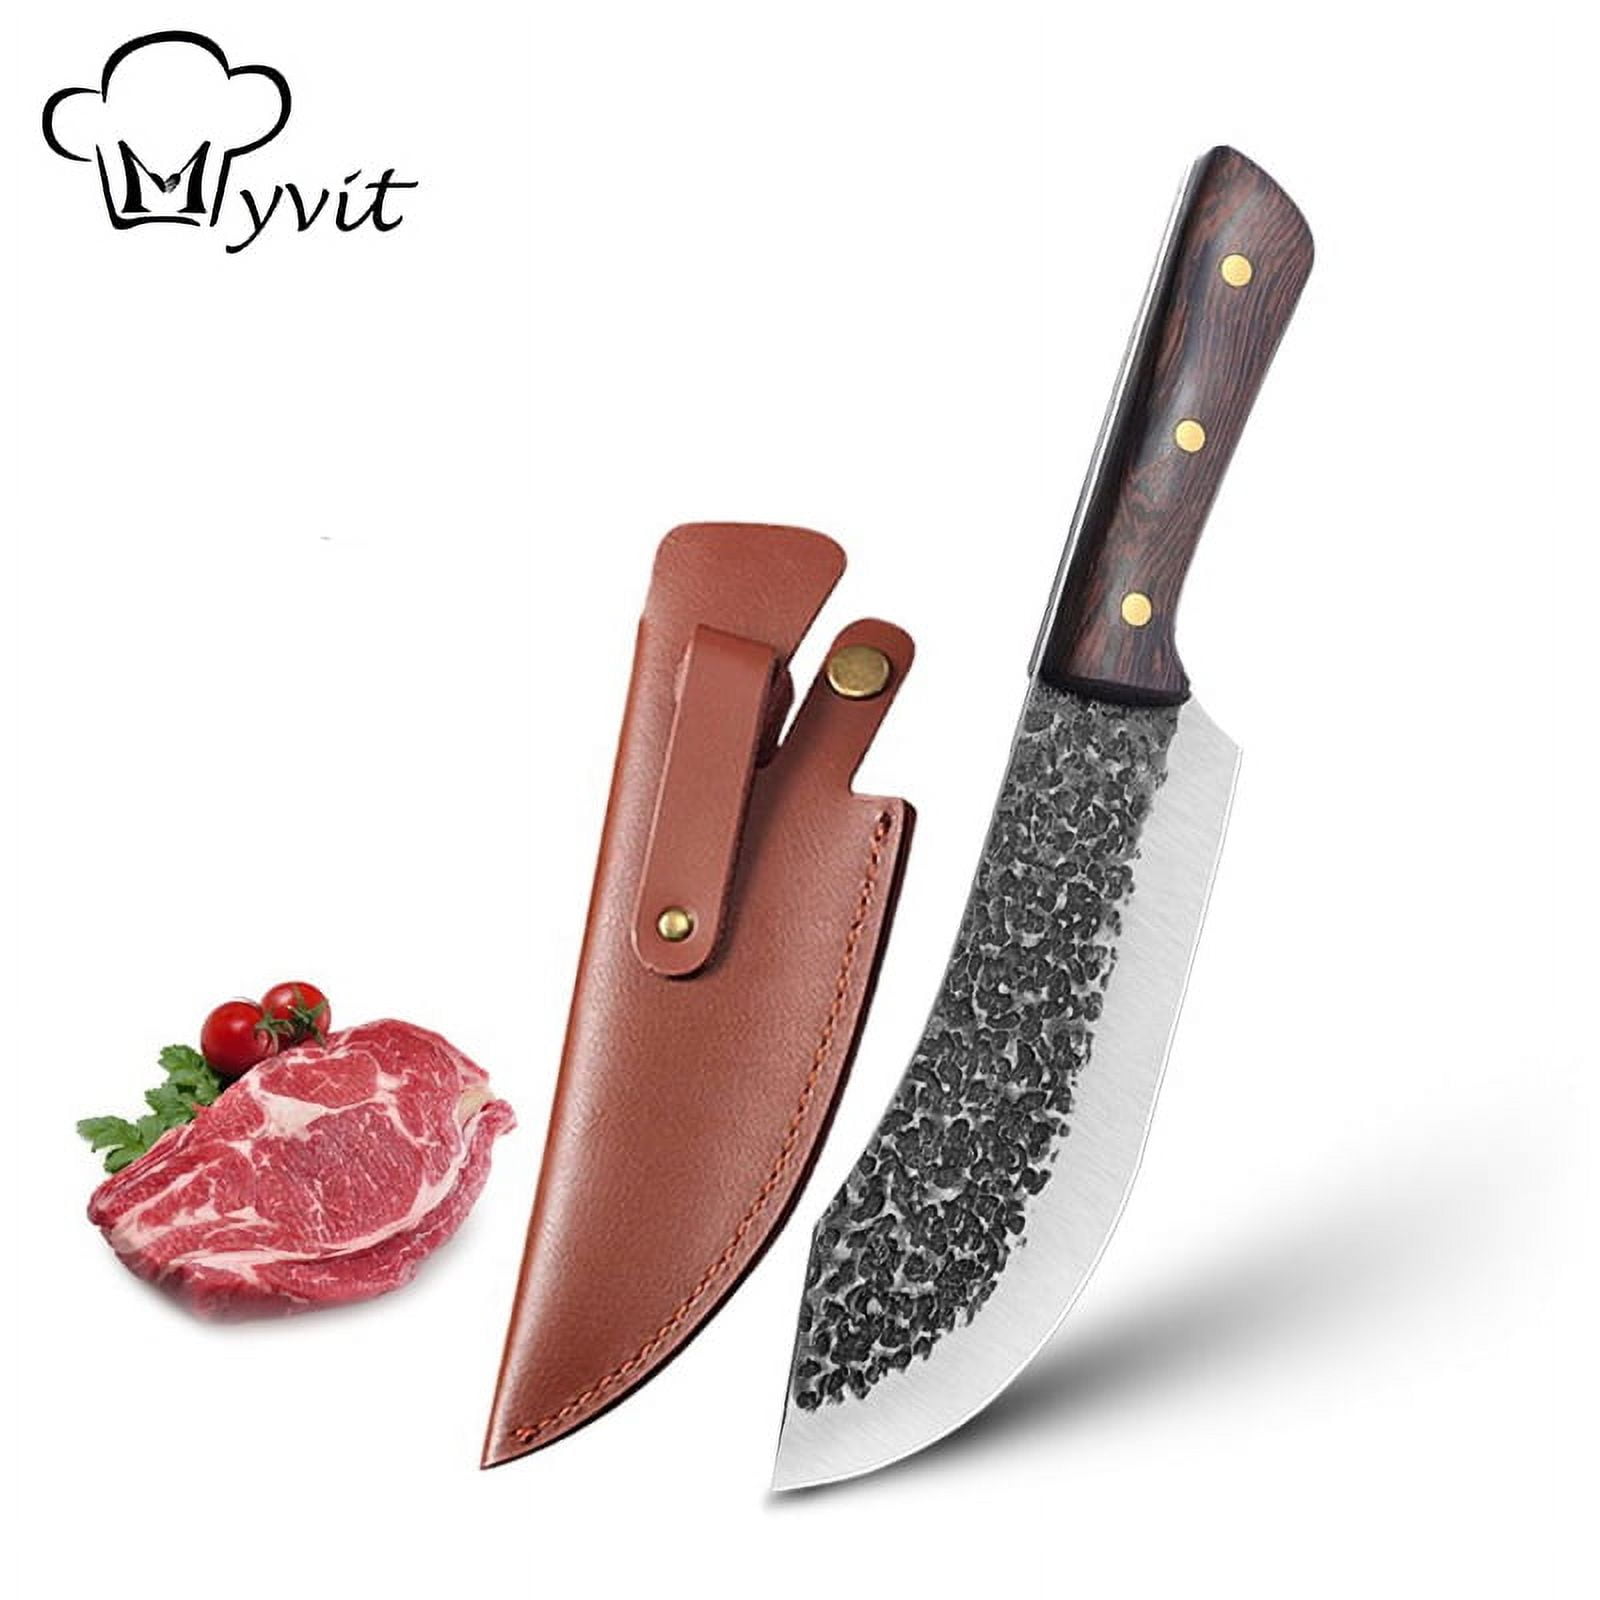 Senvitate Knife Sheath for Belt, 7 Inch Chef Knife Edge Guard, Kitchen Fish  Boning Knife Blade Protector Cover or Sleeve, Meat Cleaver Knife Case with